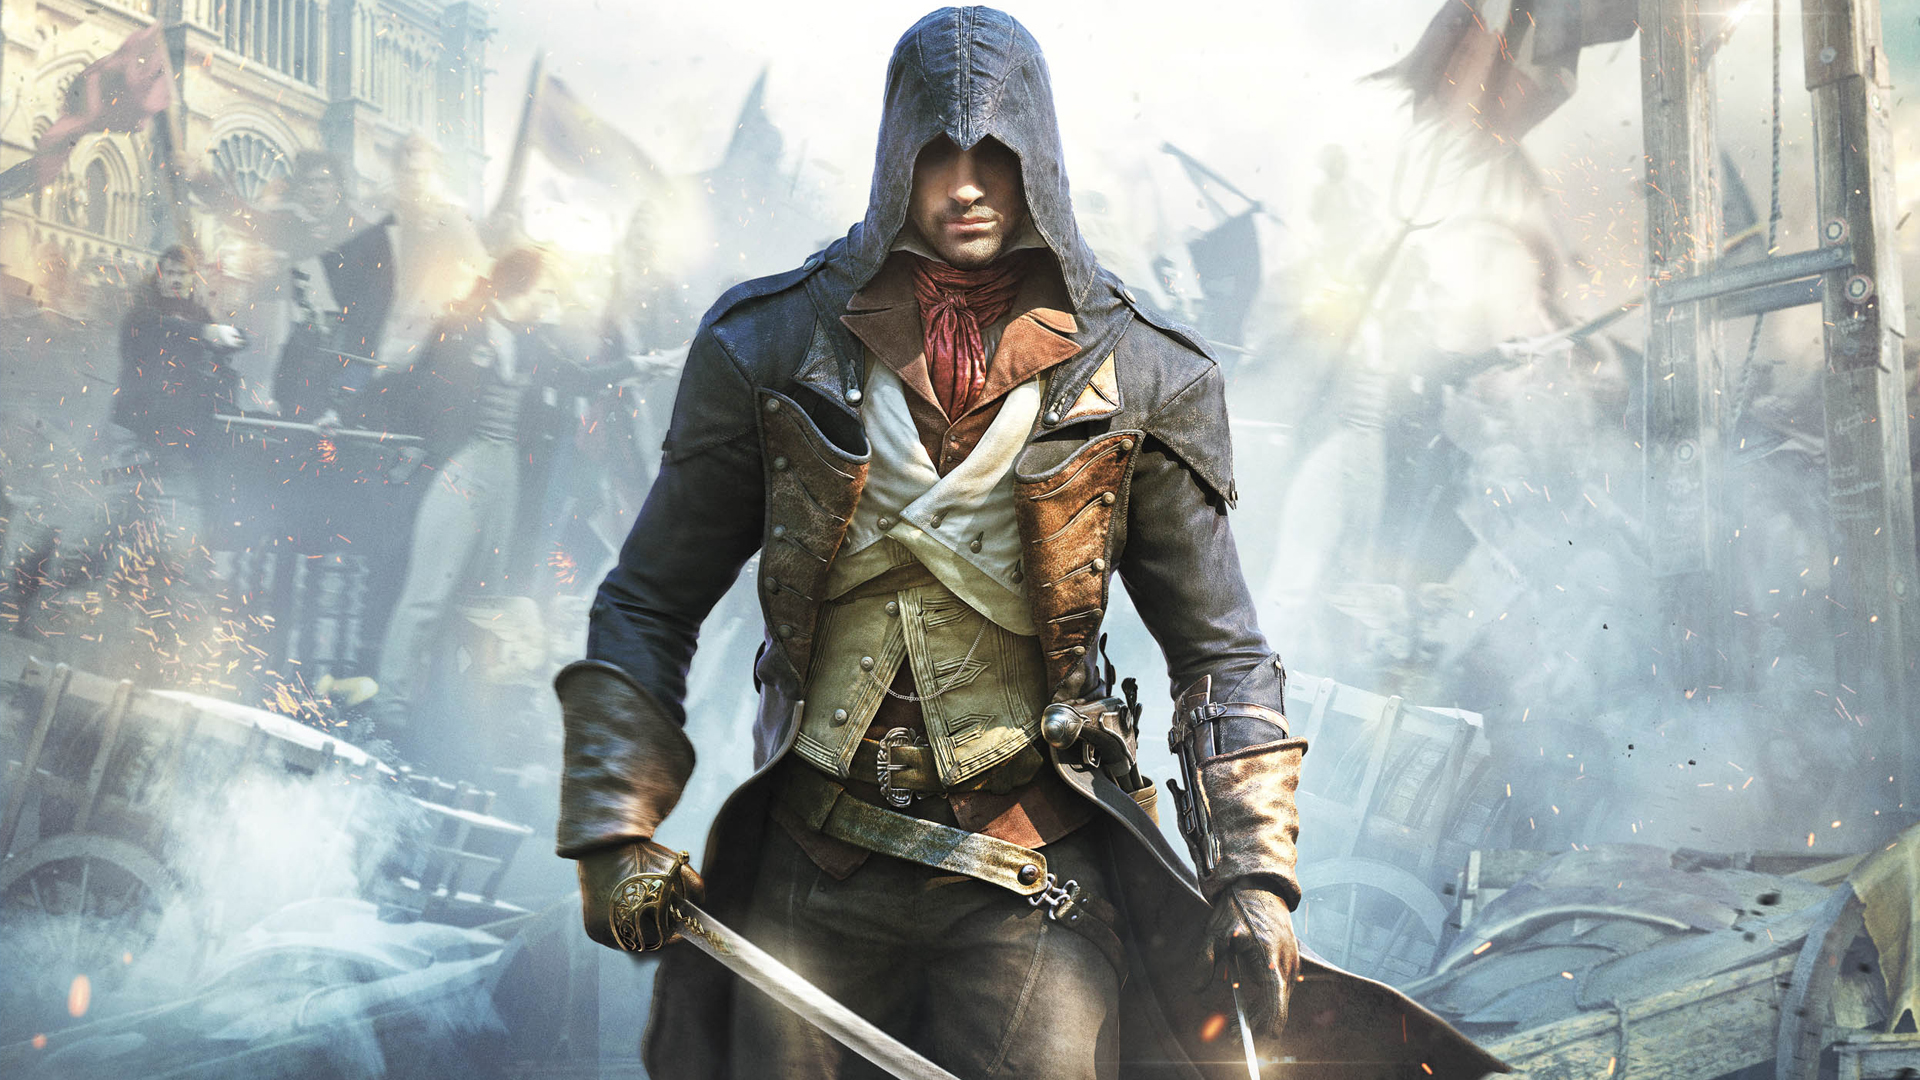 desktop Images arno dorian, assassin's creed, video game, assassin's creed: unity